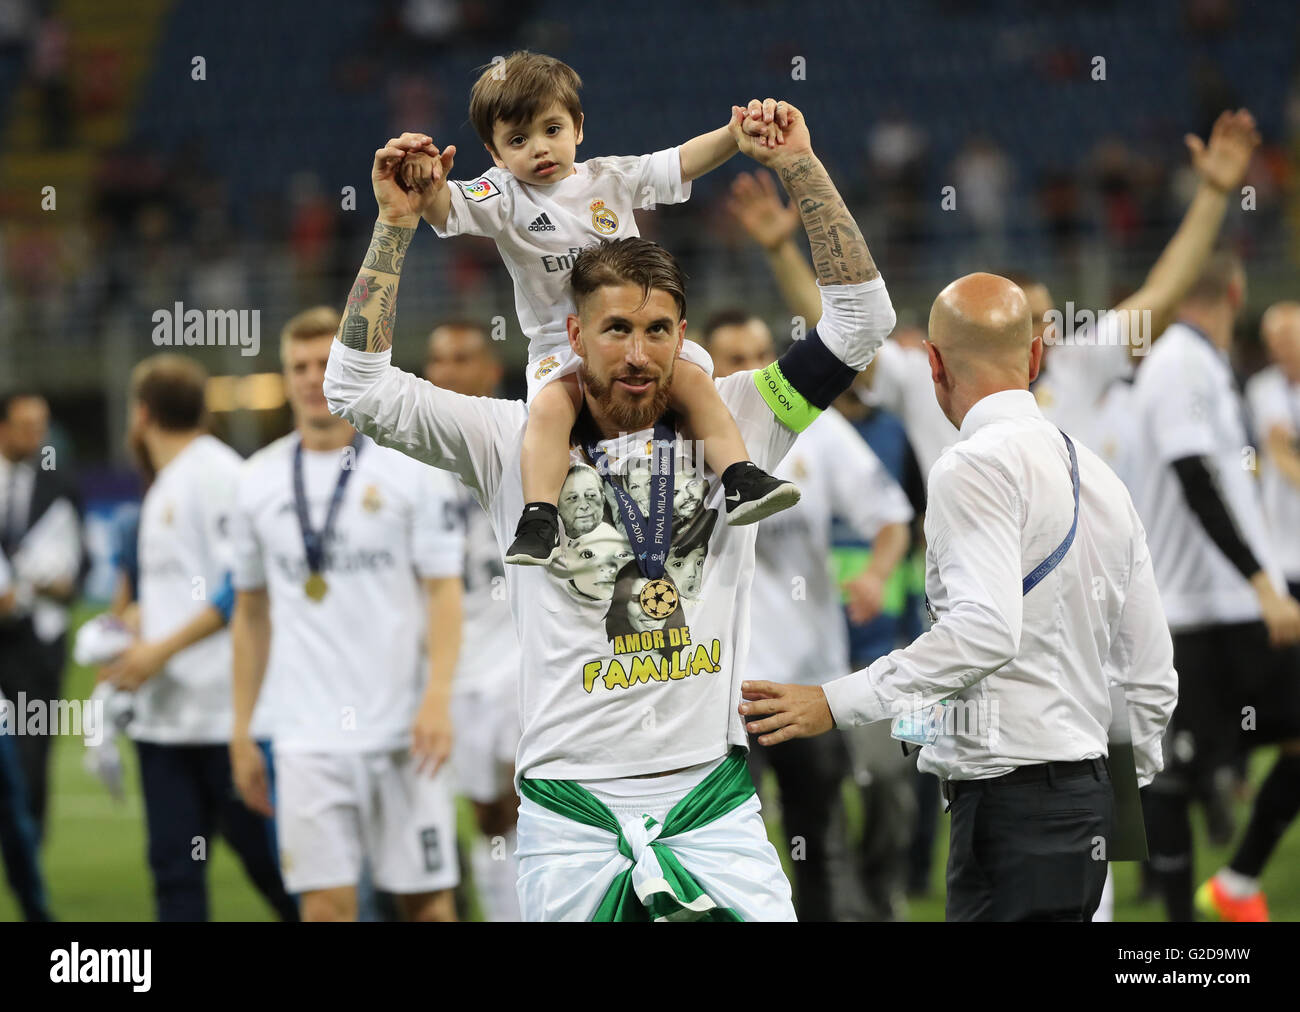 Milan, Italy. 28th May, 2016. Real's captain Sergio Ramos celebrates with child after winning the UEFA Champions League Final between Real Madrid and Atletico Madrid at the Stadio Giuseppe Meazza in Milan, Italy, 28 May 2016. Photo: Christian Charisius/dpa/Alamy Live News Stock Photo